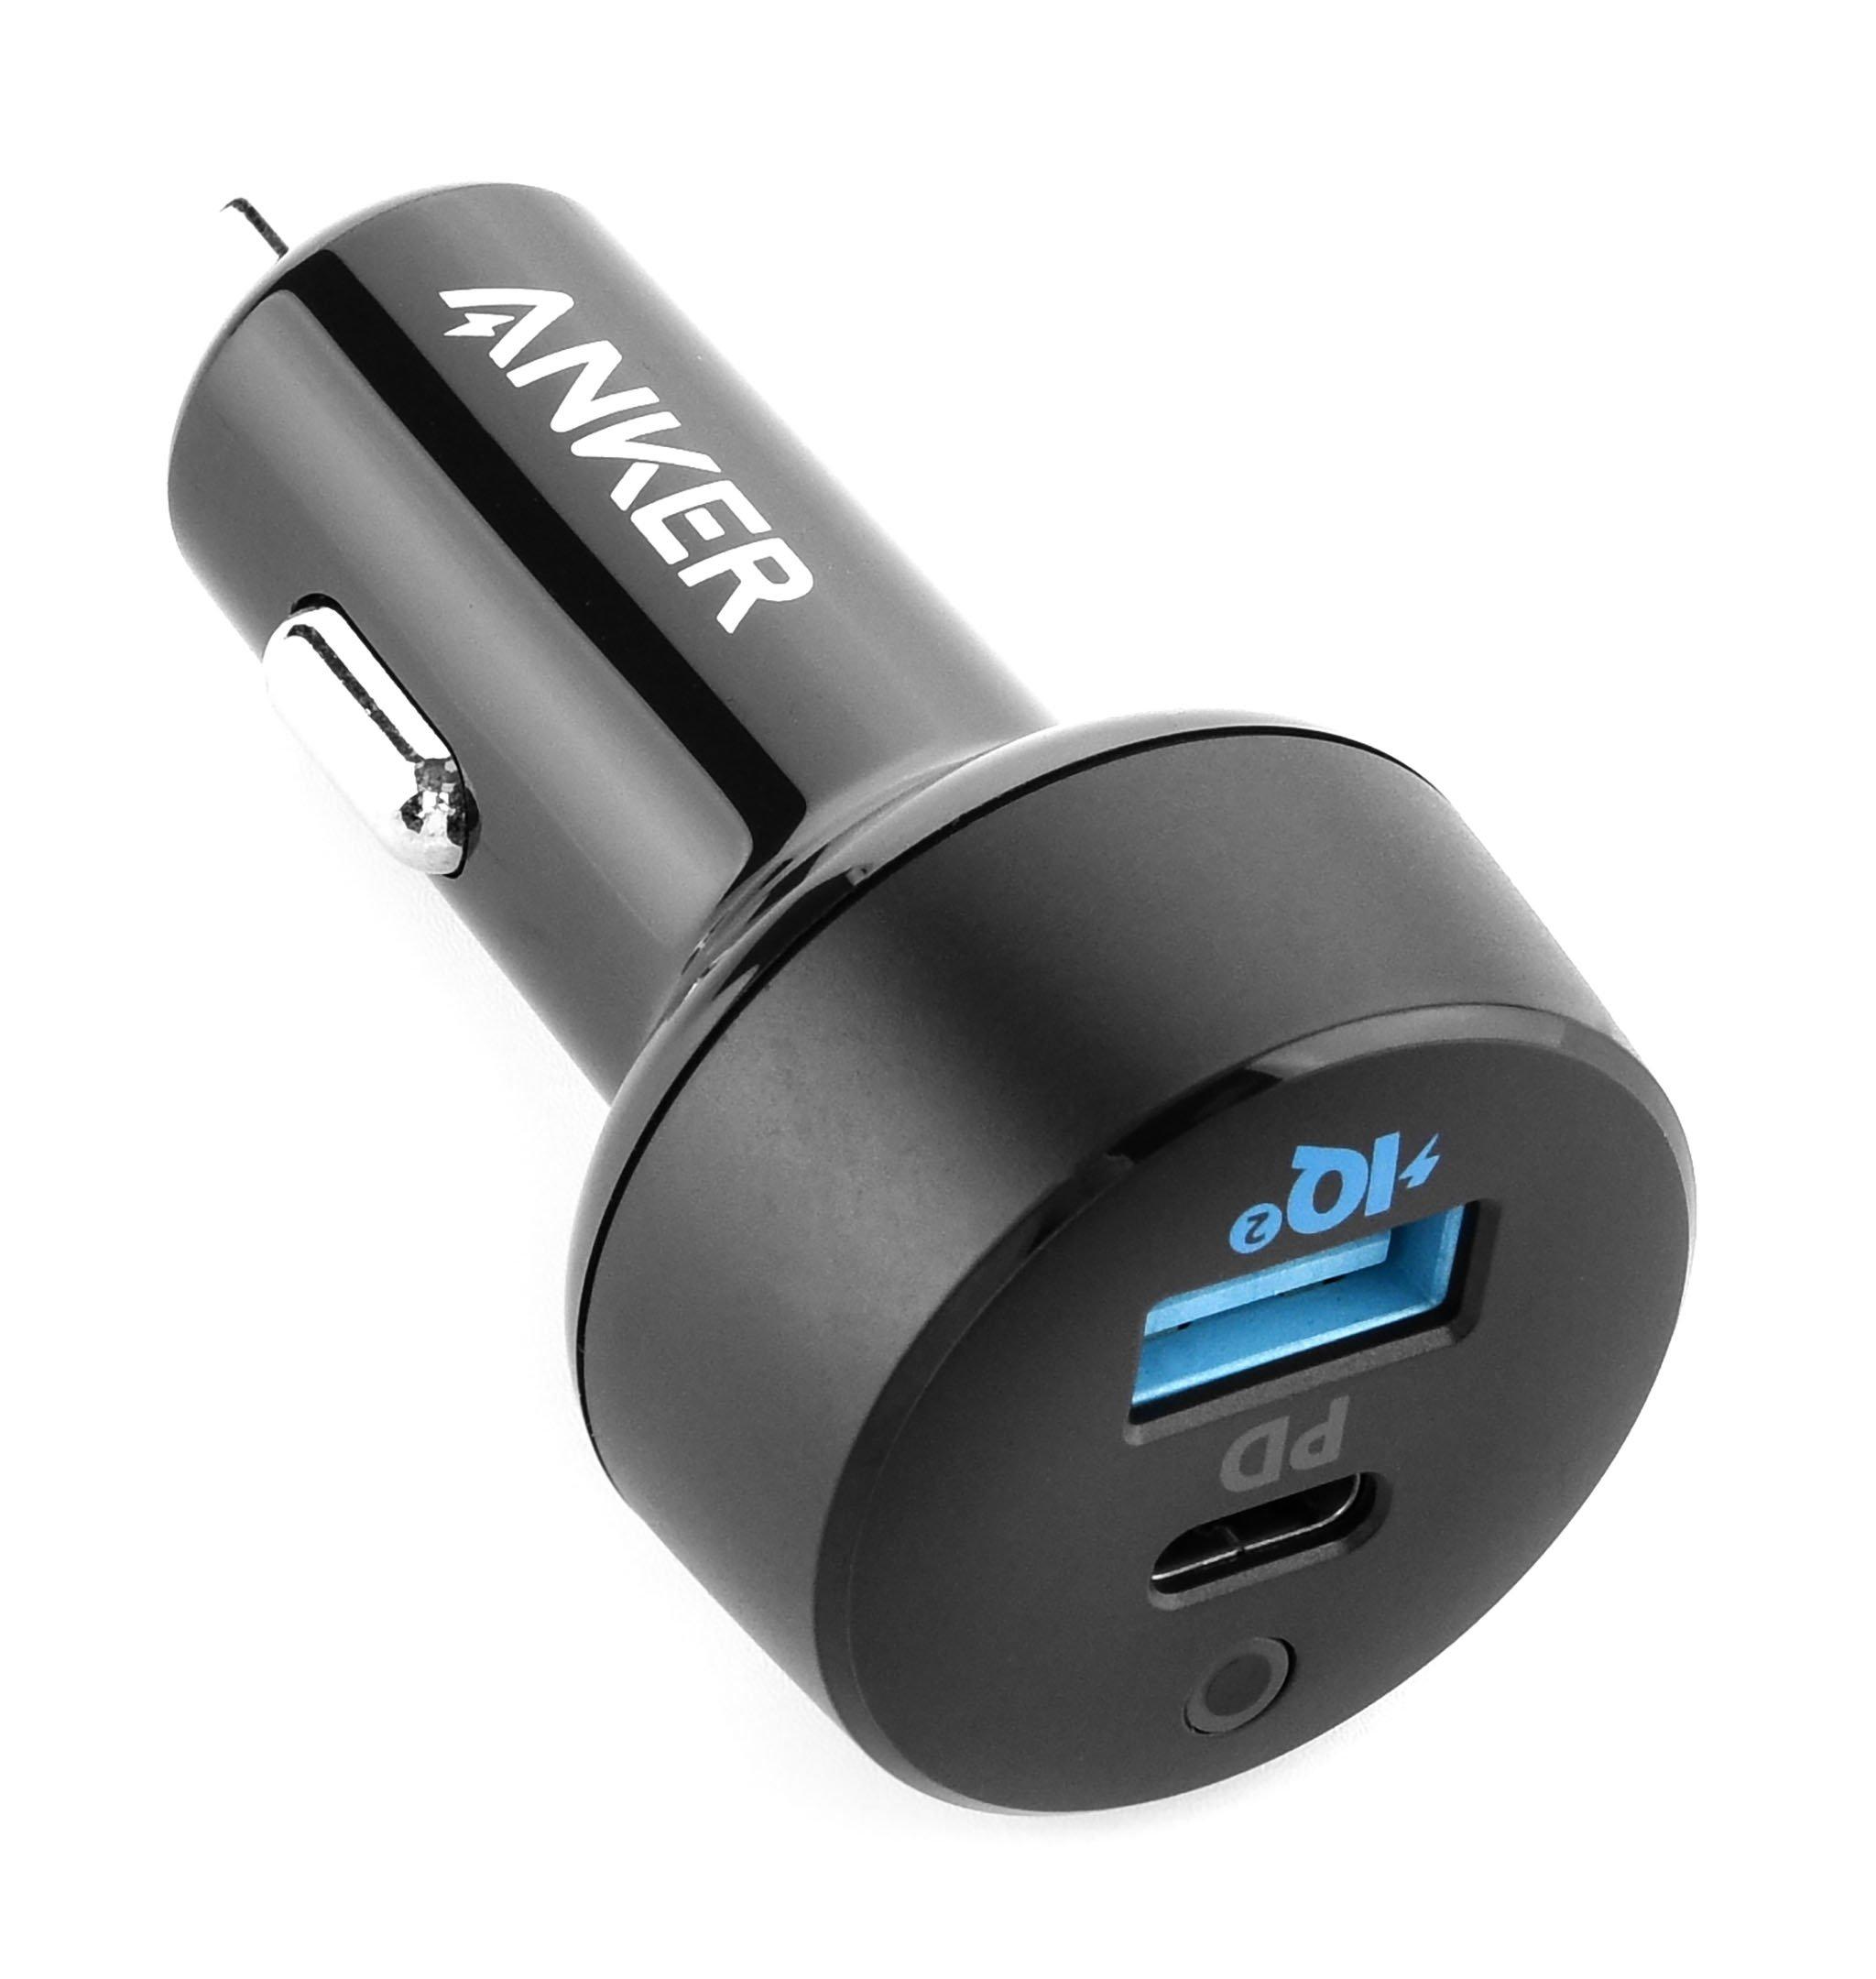 Anker Power Drive Pd 2 Car Charger With Power Delivery Power Iq 2 0 Black Price In Saudi Arabia Extra Stores Saudi Arabia Kanbkam